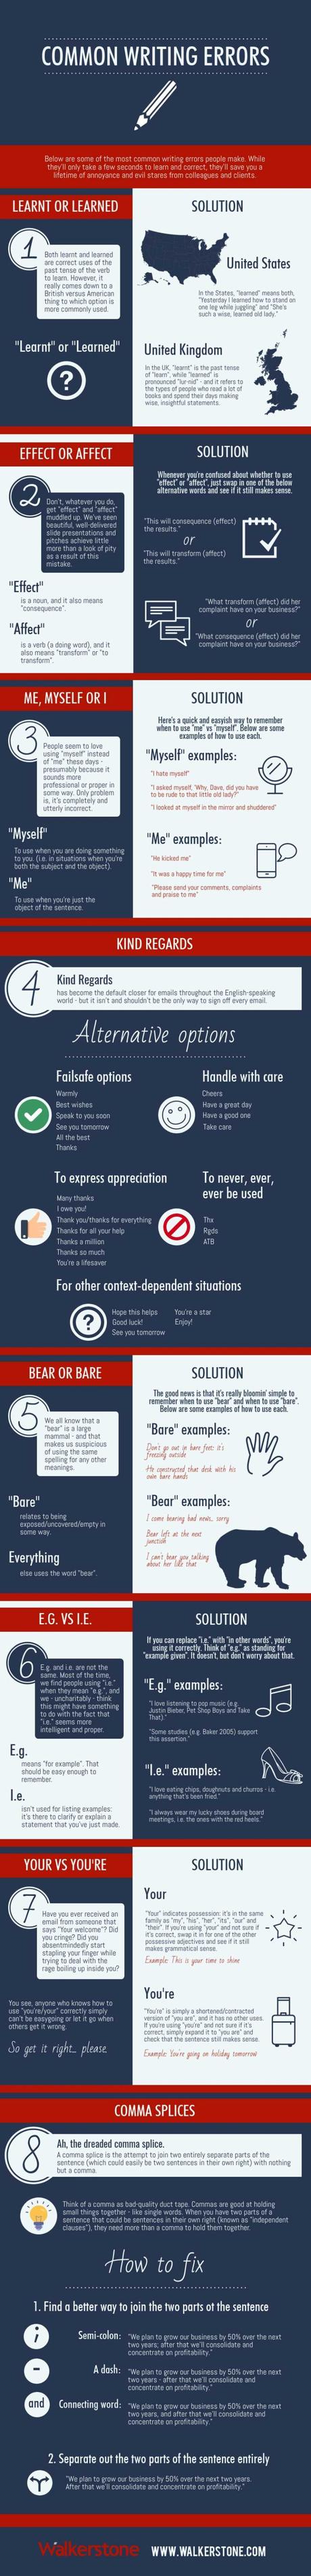 8 Common Writing Errors That Make You Look Unprofessional (Infographic)